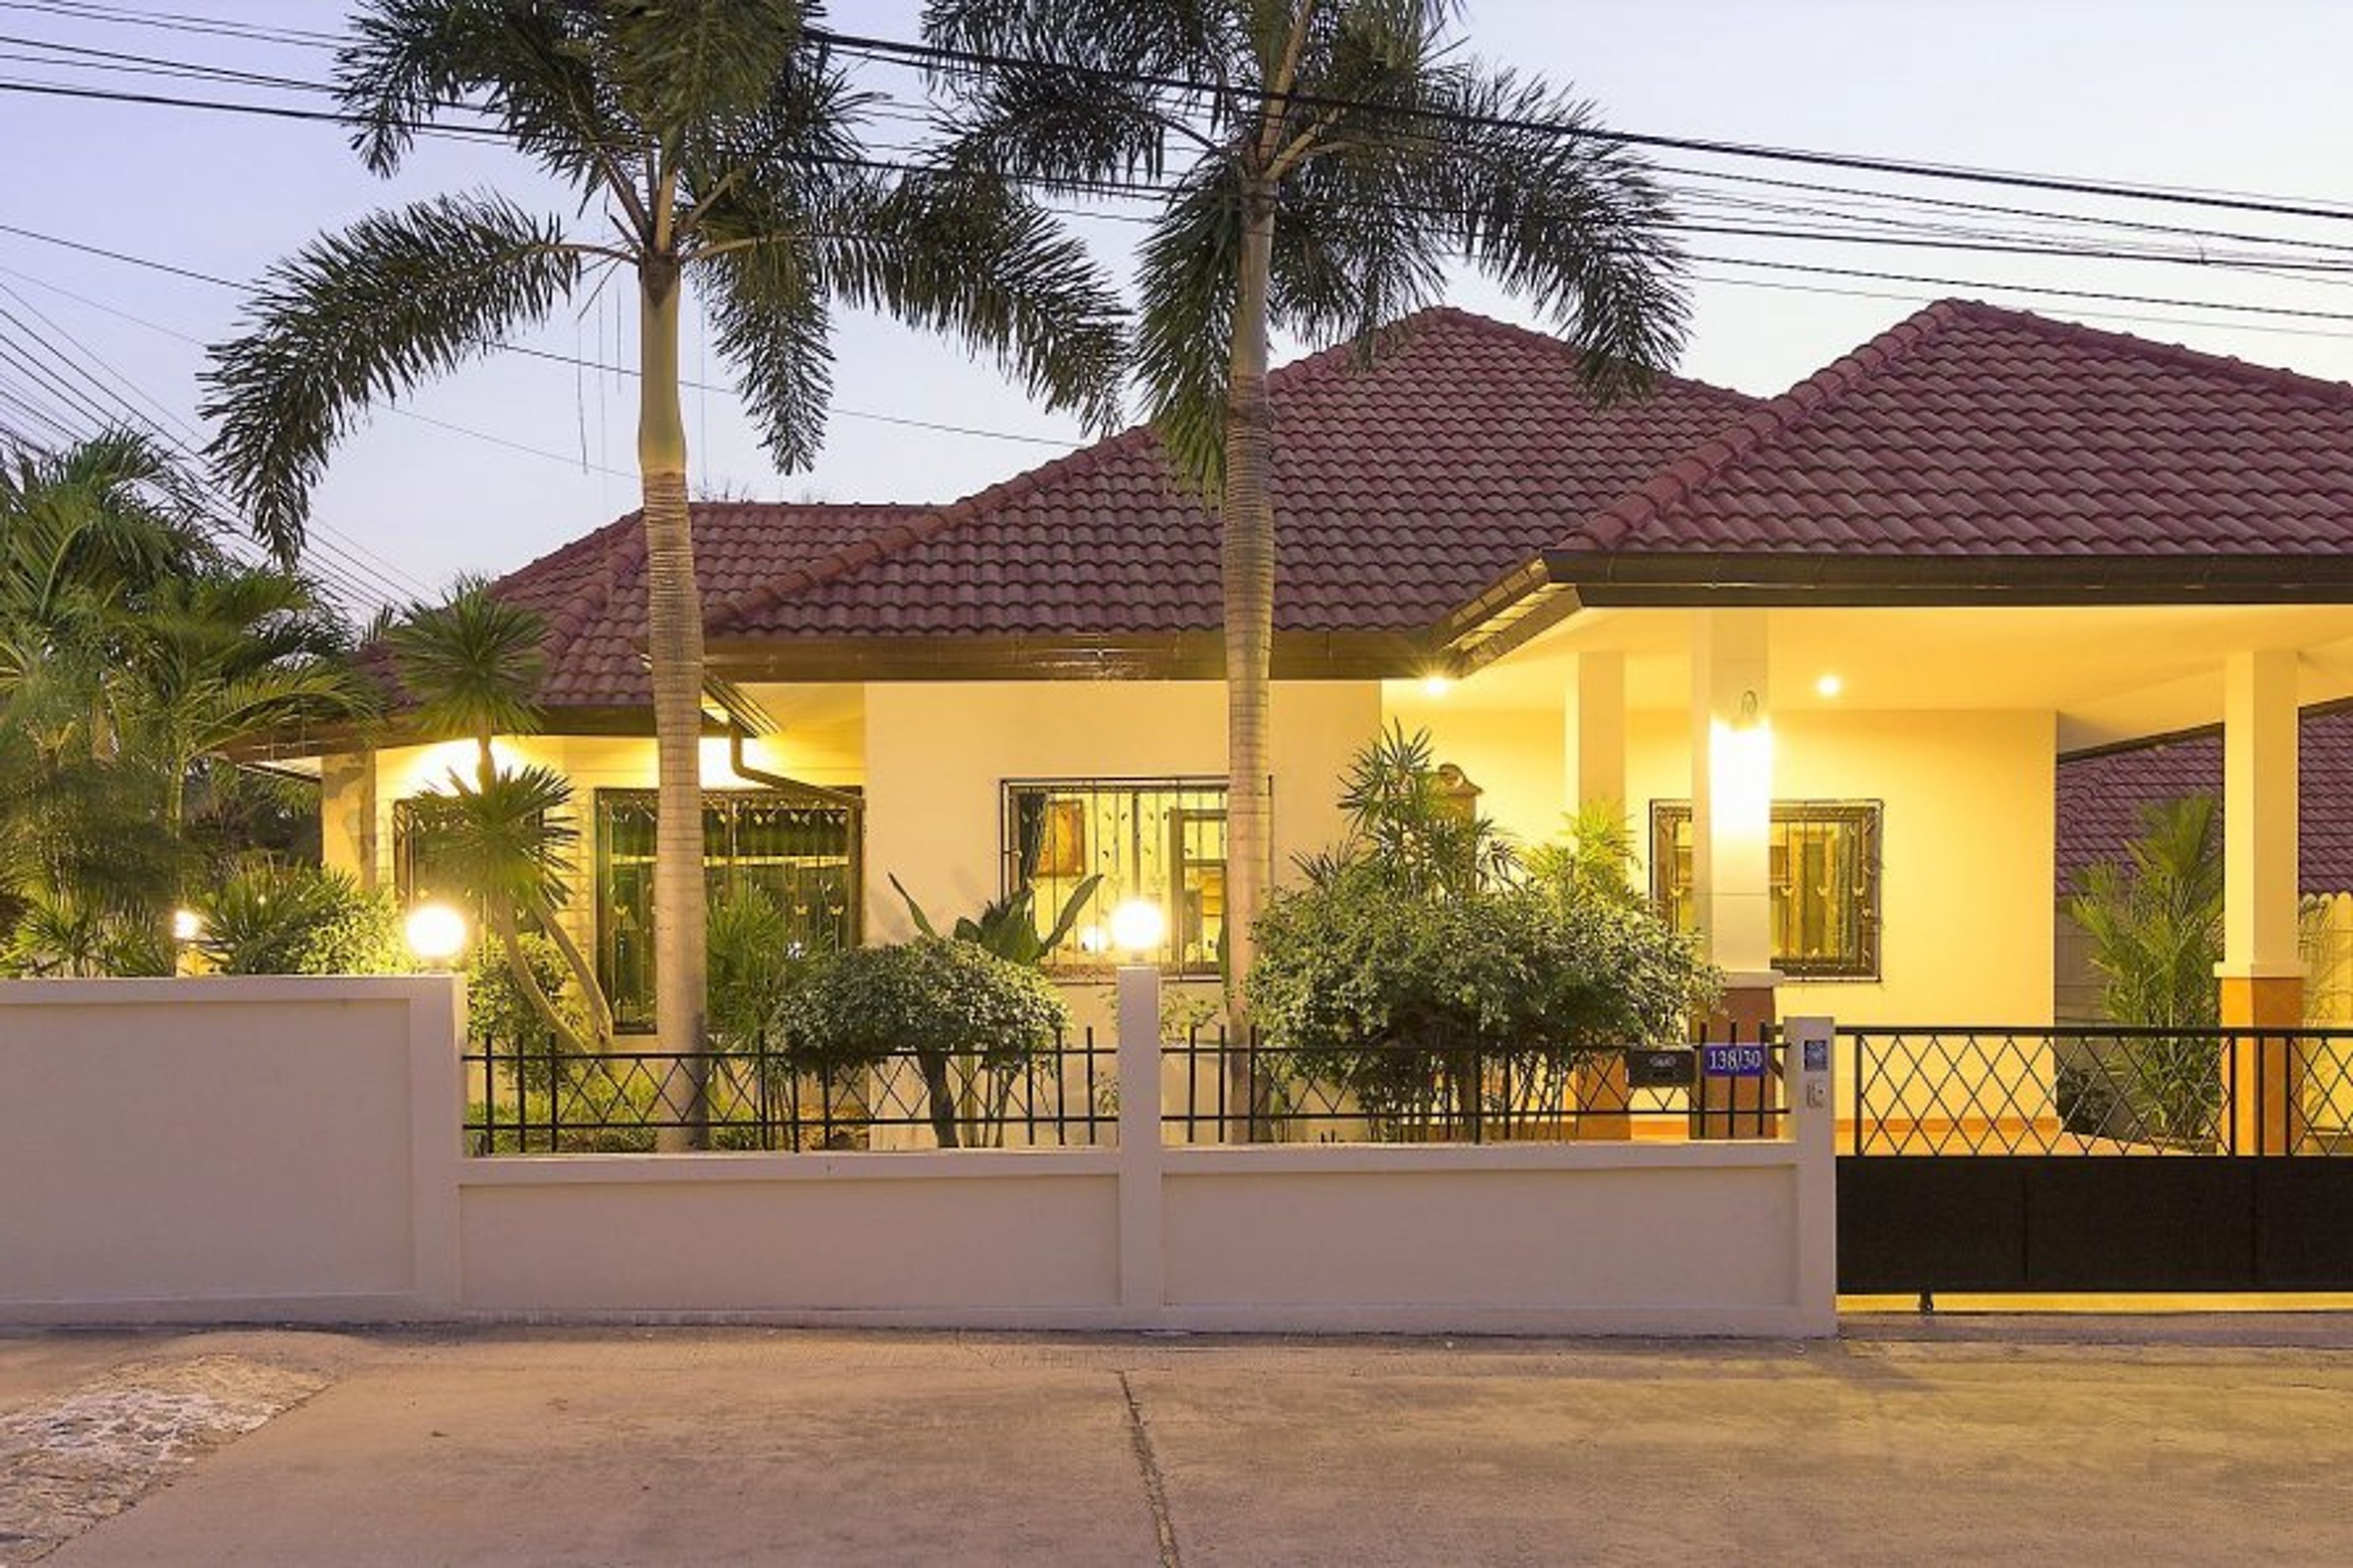 Spacious villa positioned on a corner plot with secure entrance